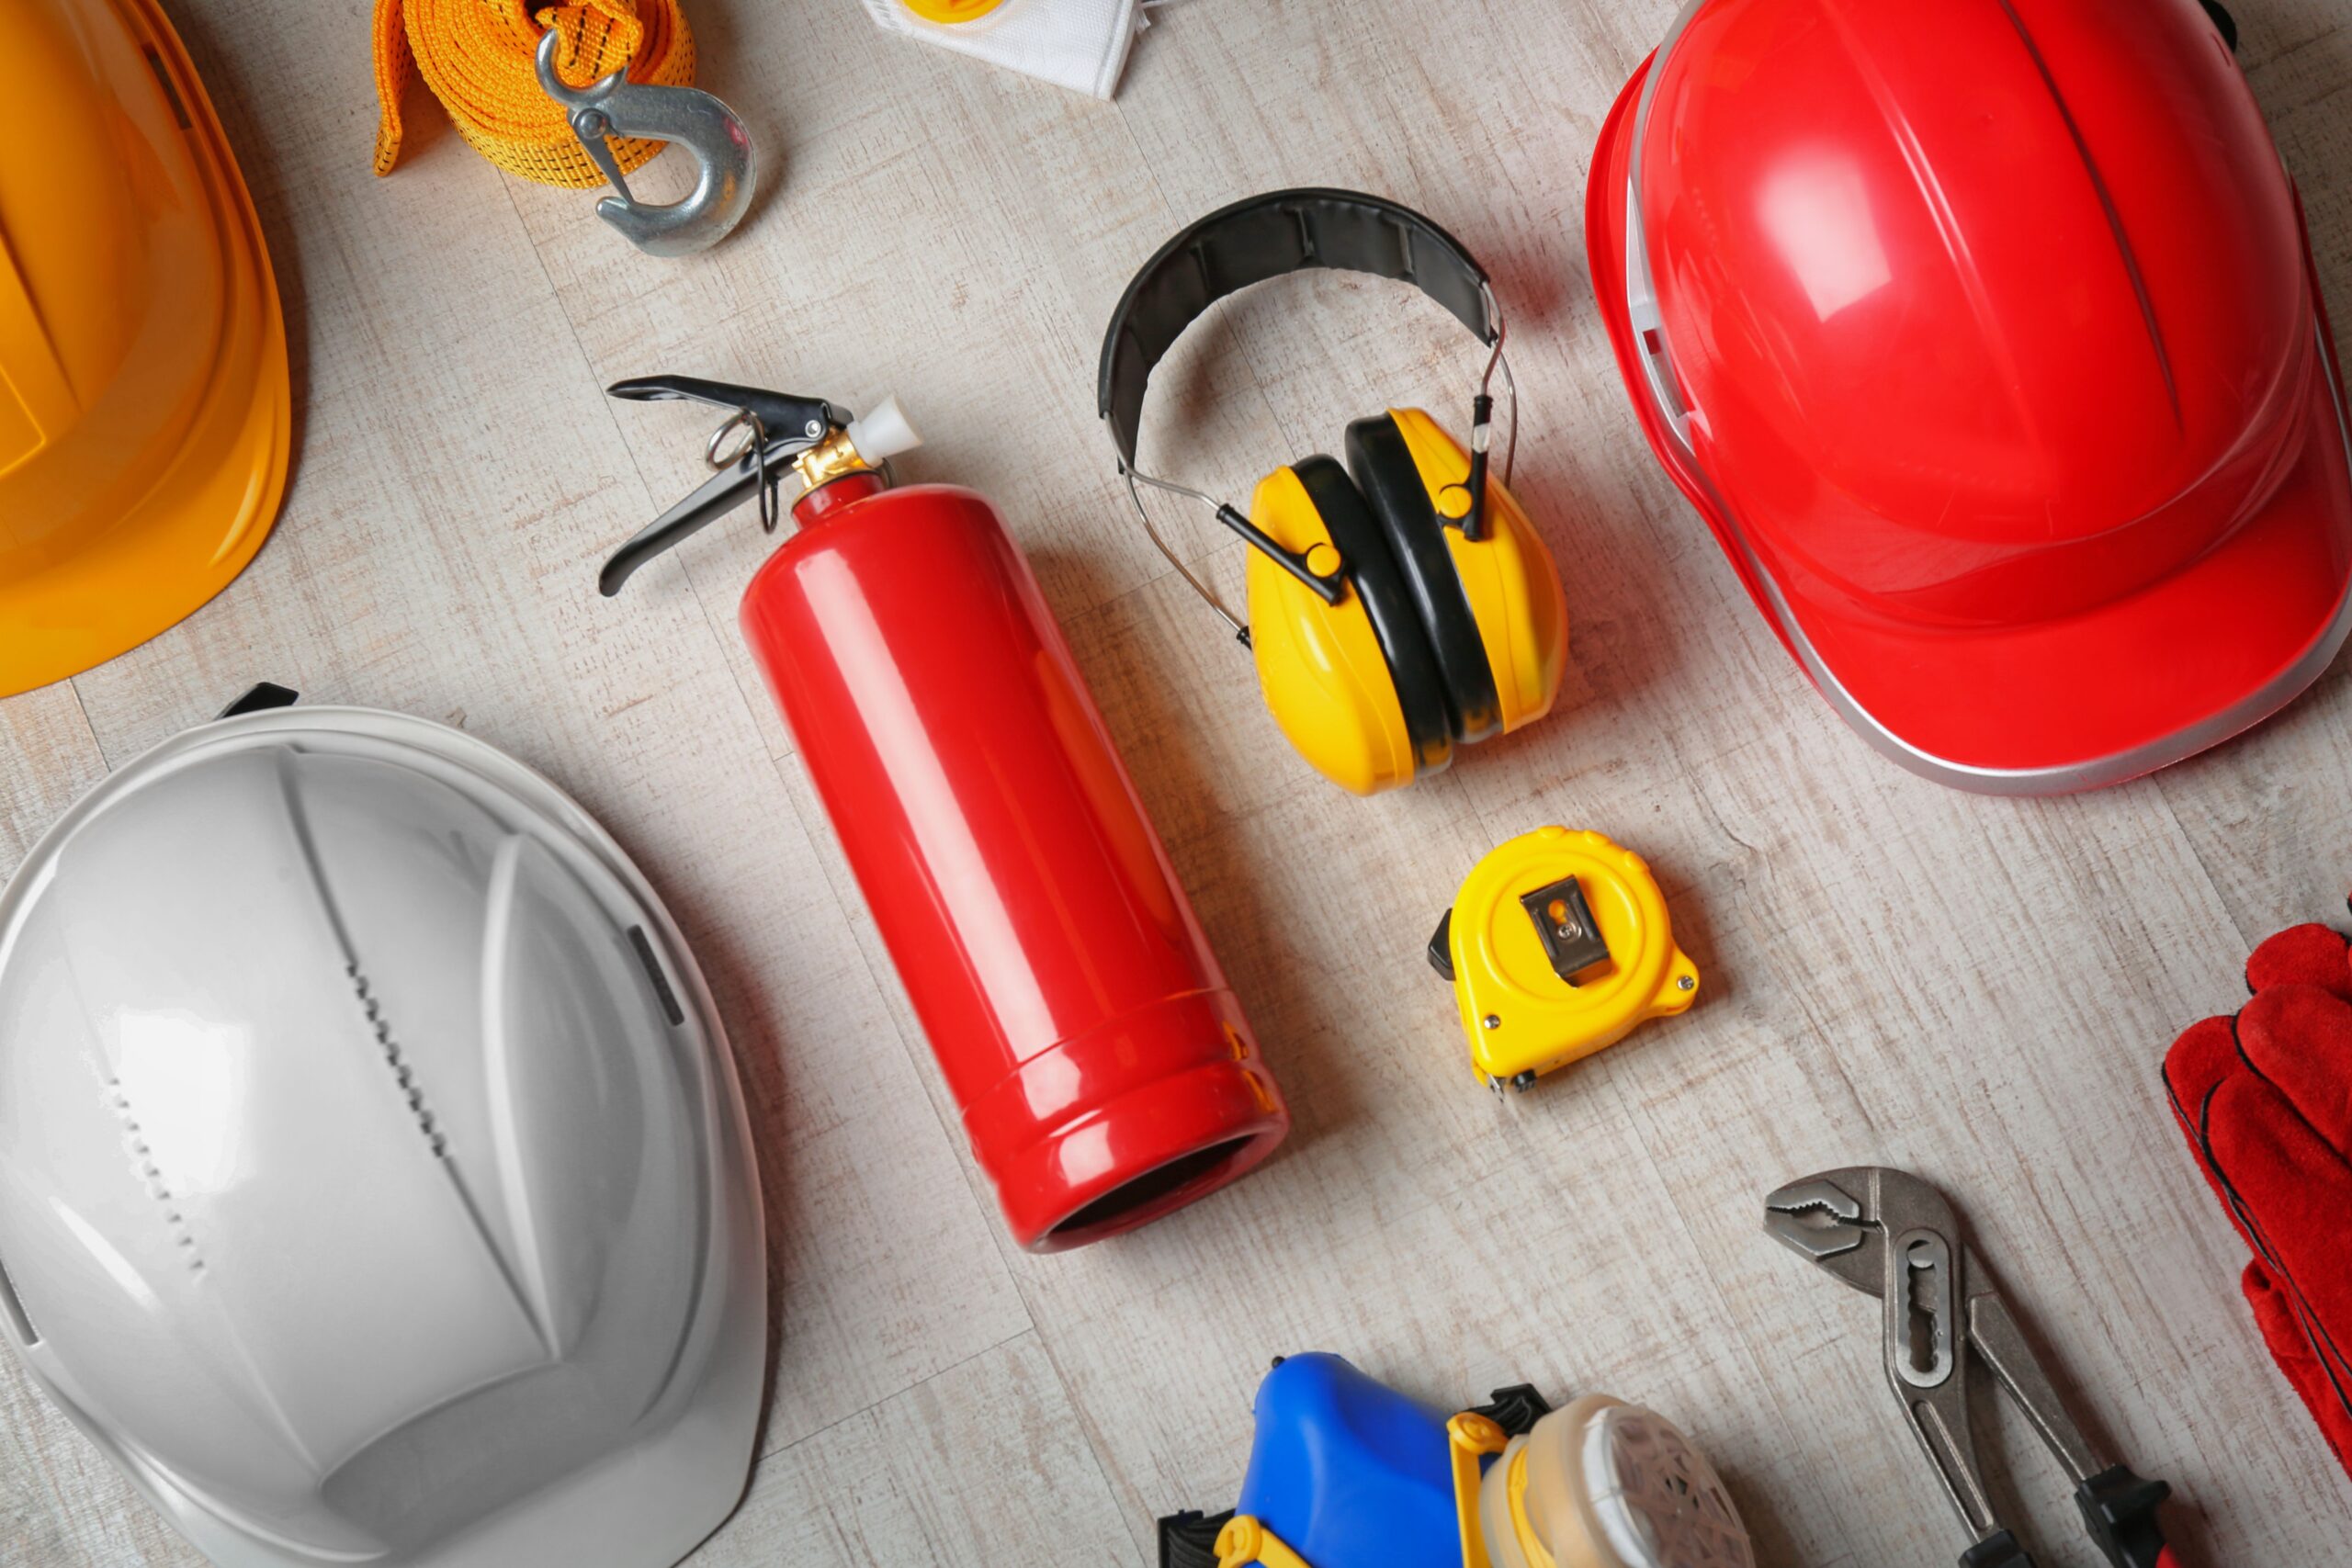 Construction Manager's Guide To Creating A Fire Safety Plan For A Project